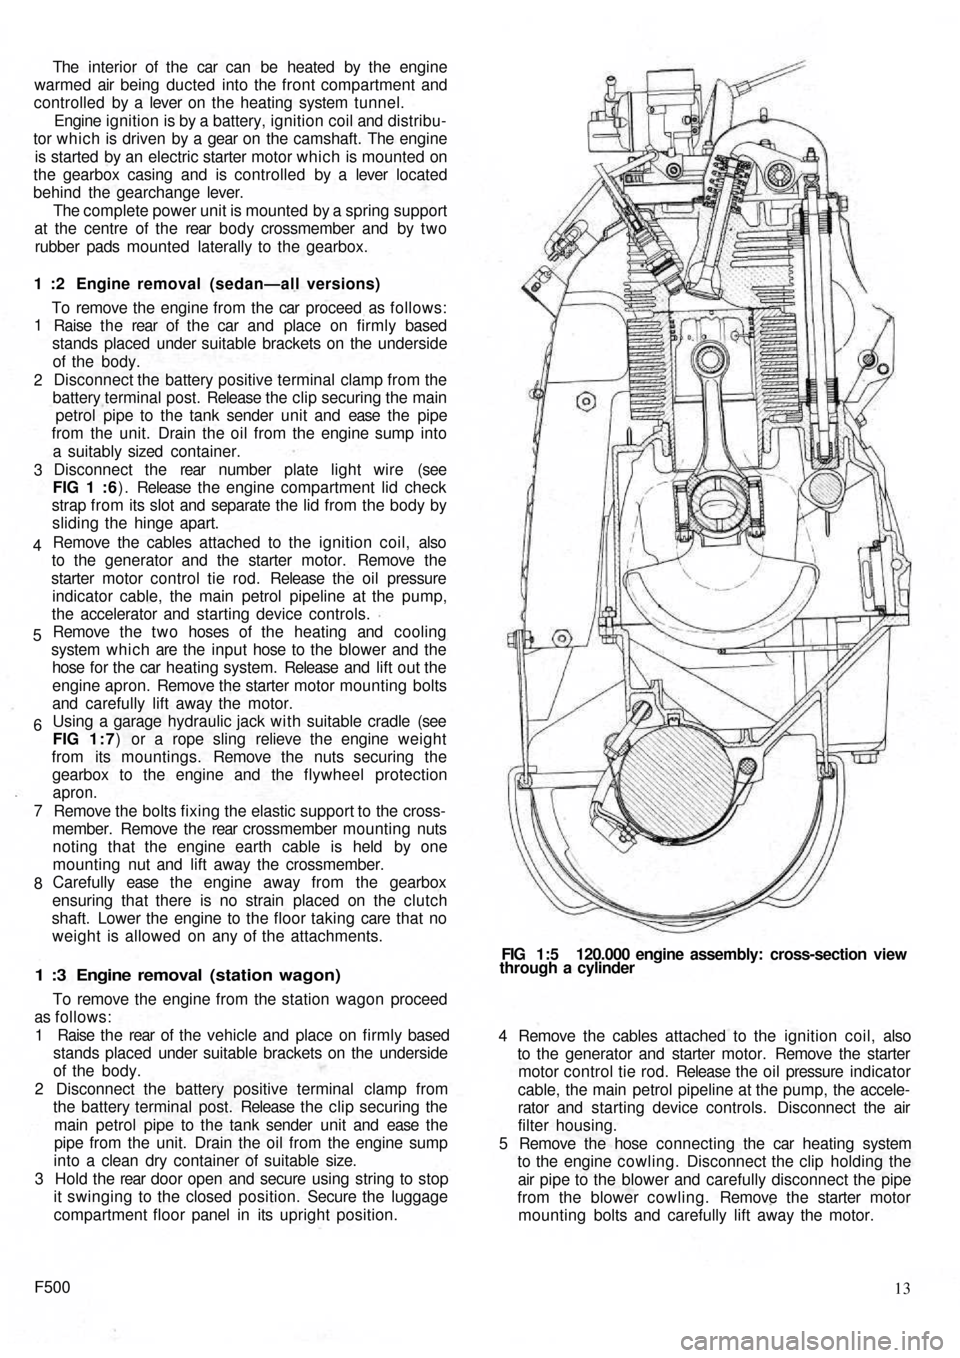 FIAT 500 1970 1.G Workshop Manual The  interior of the  car can  be heated by the engine
warmed air being ducted into the front compartment and
controlled  by a  lever on the heating system tunnel.
Engine ignition is by a battery, ign